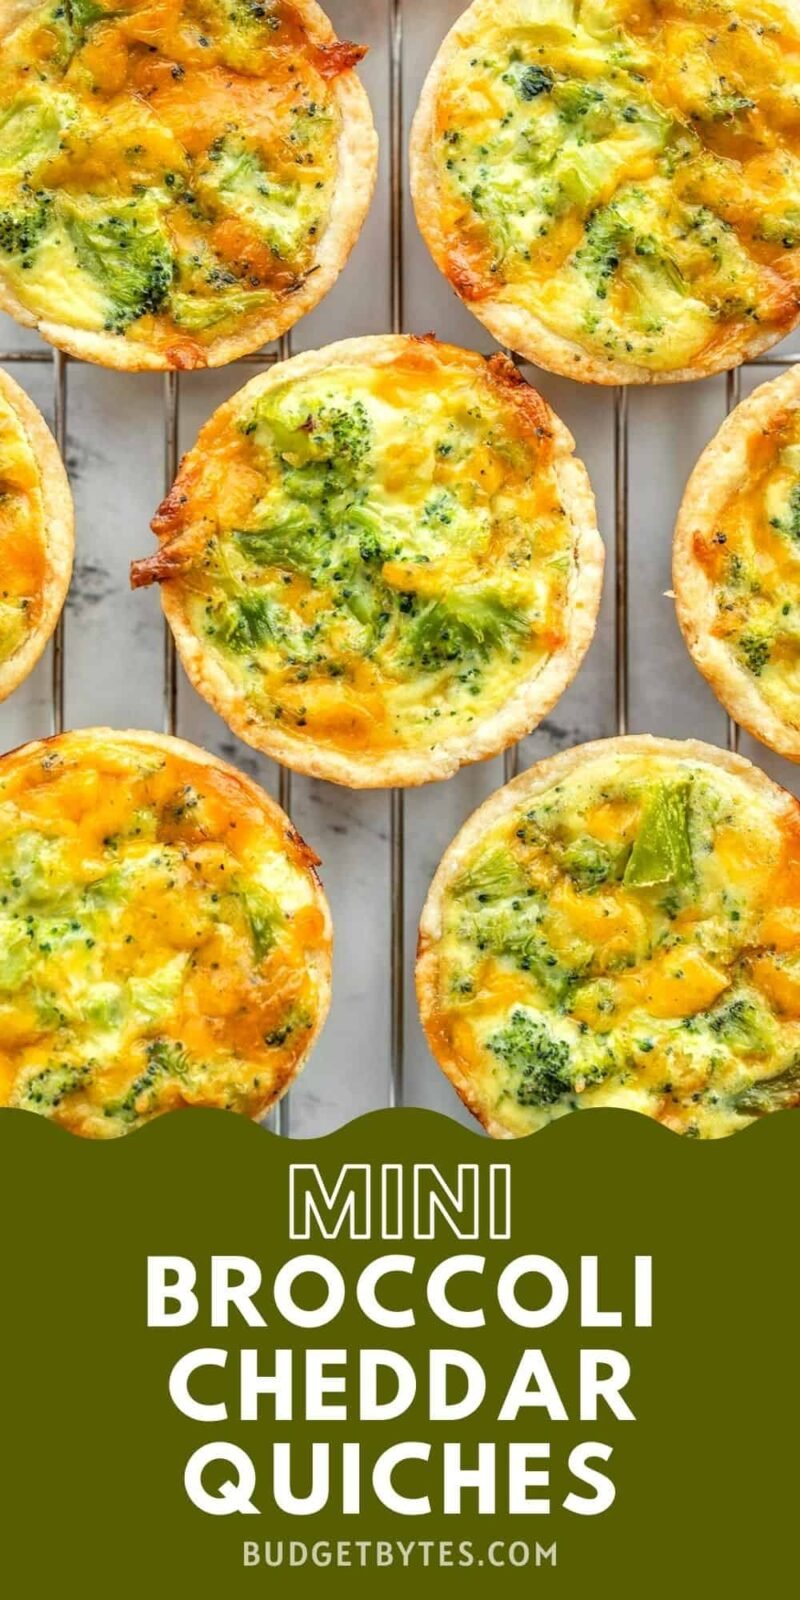 Mini broccoli cheddar quiches on a wire rack, title text at the bottom.